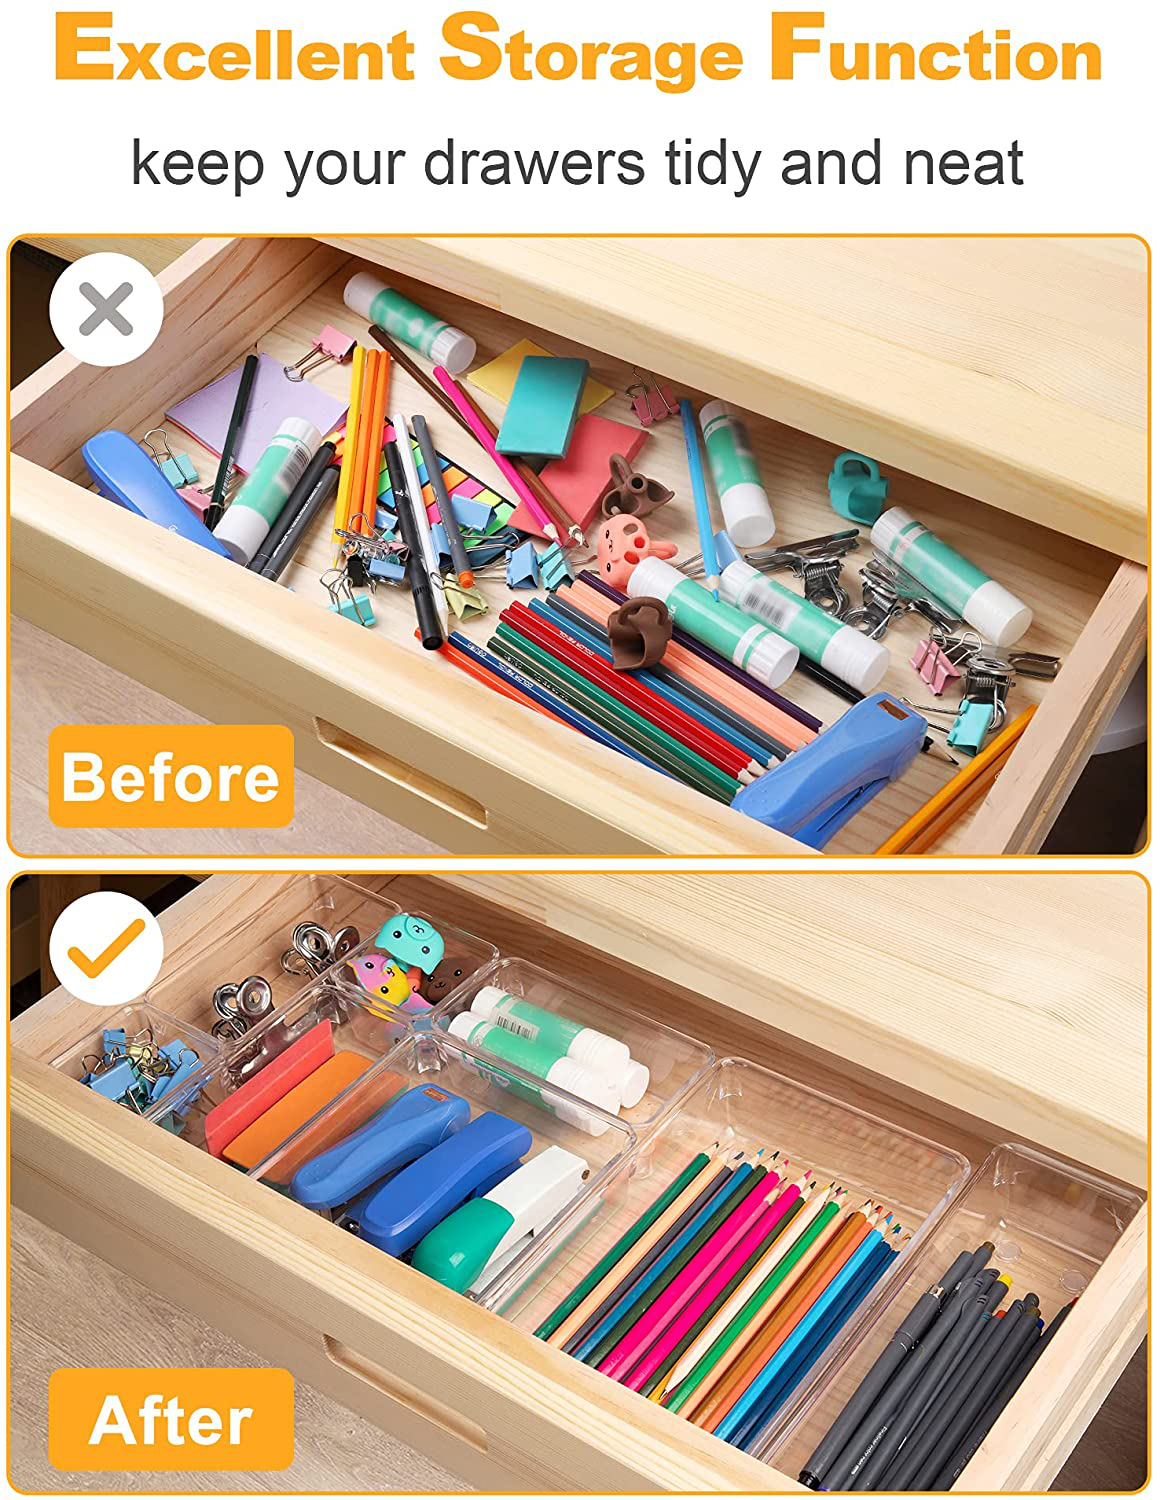 SMARTAKE 13-Piece Drawer Organizers with Non-Slip Silicone Pads, 5-Size Desk Drawer Organizer Trays Storage Tray for Makeup, Jewelries, Utensils in Bedroom Dresser, Office and Kitchen, Light Brown